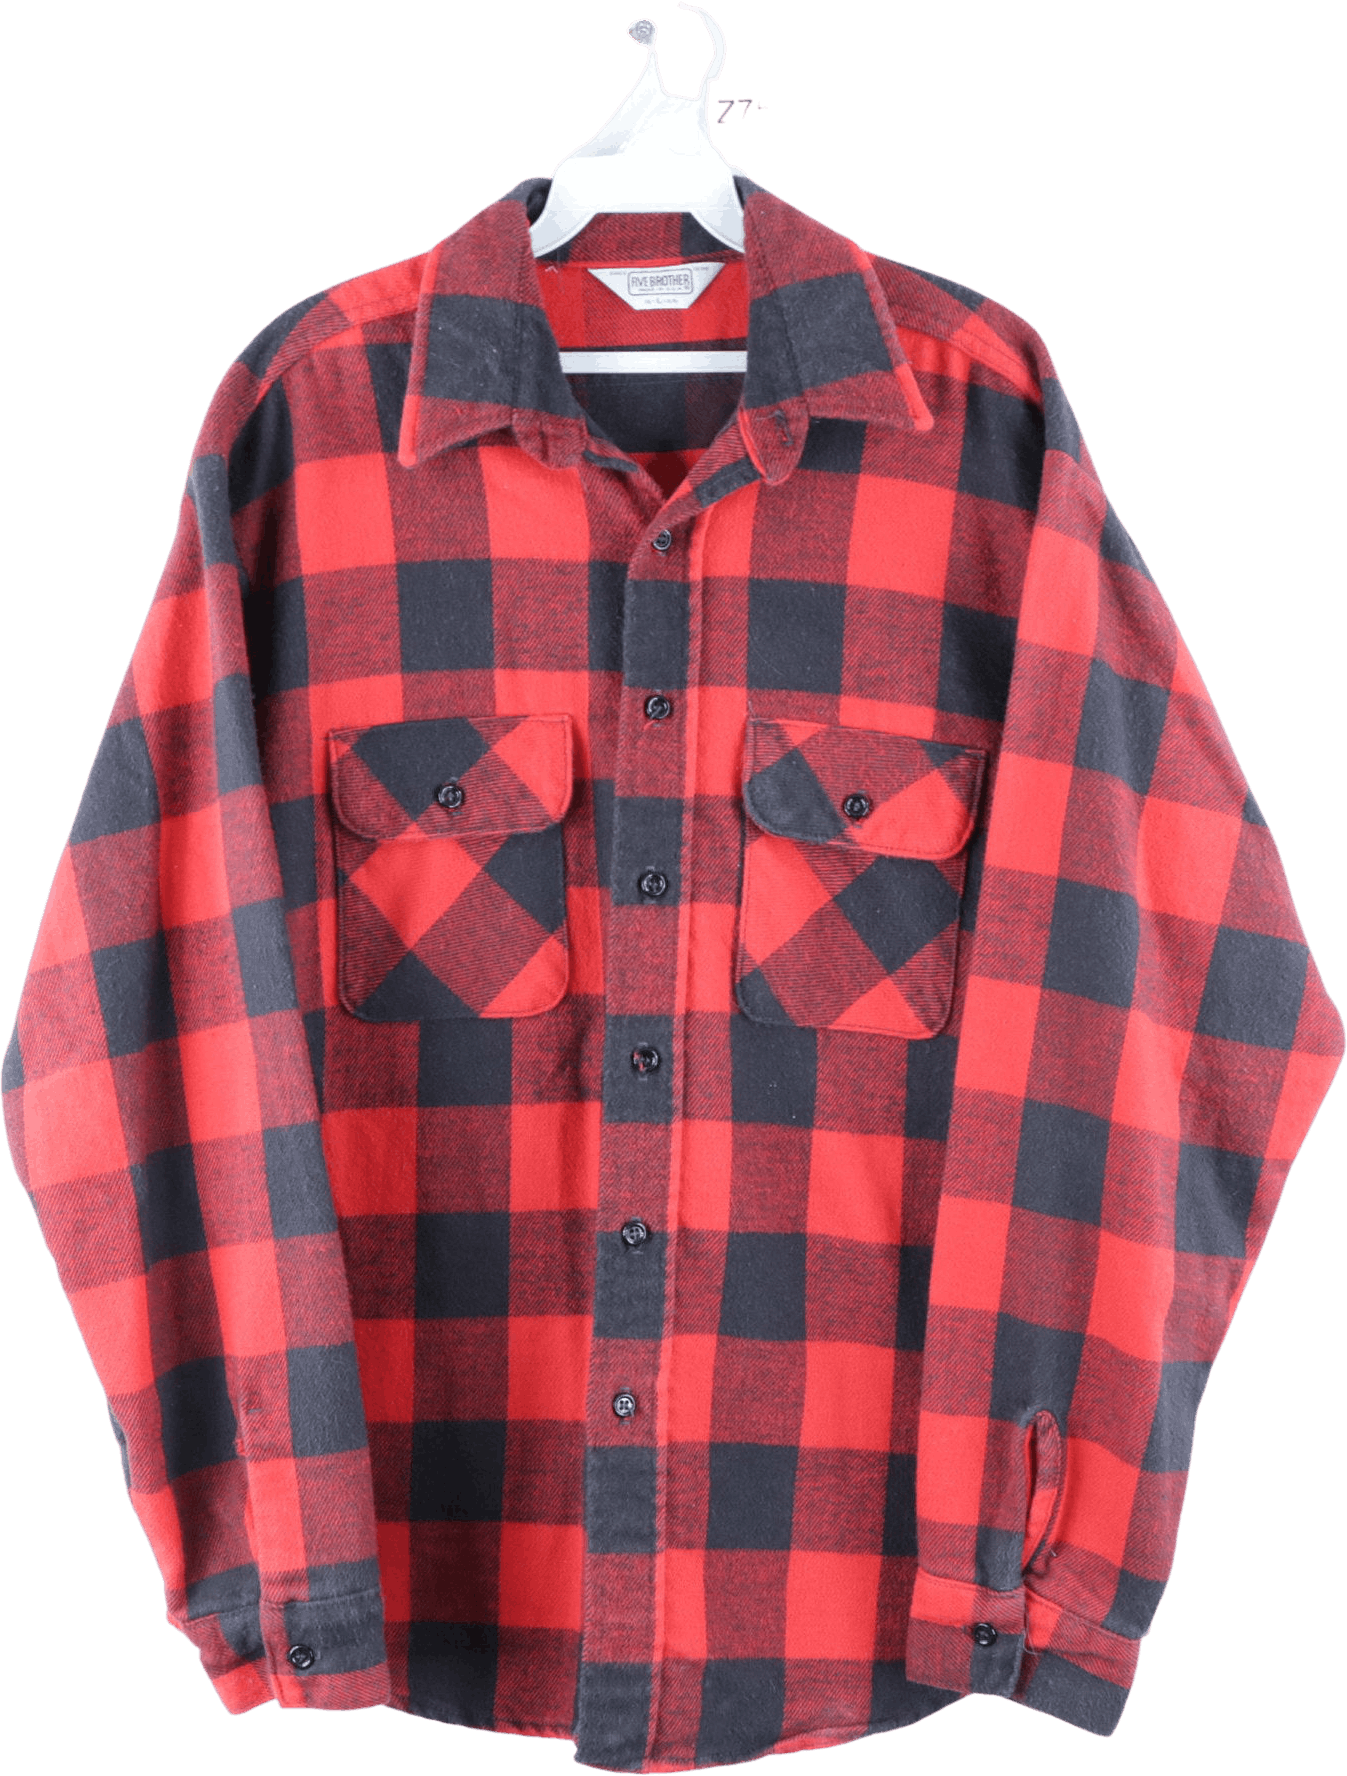 Vintage 70’s Men's Double Pocket Red Buffalo Plaid Shirt by Five ...